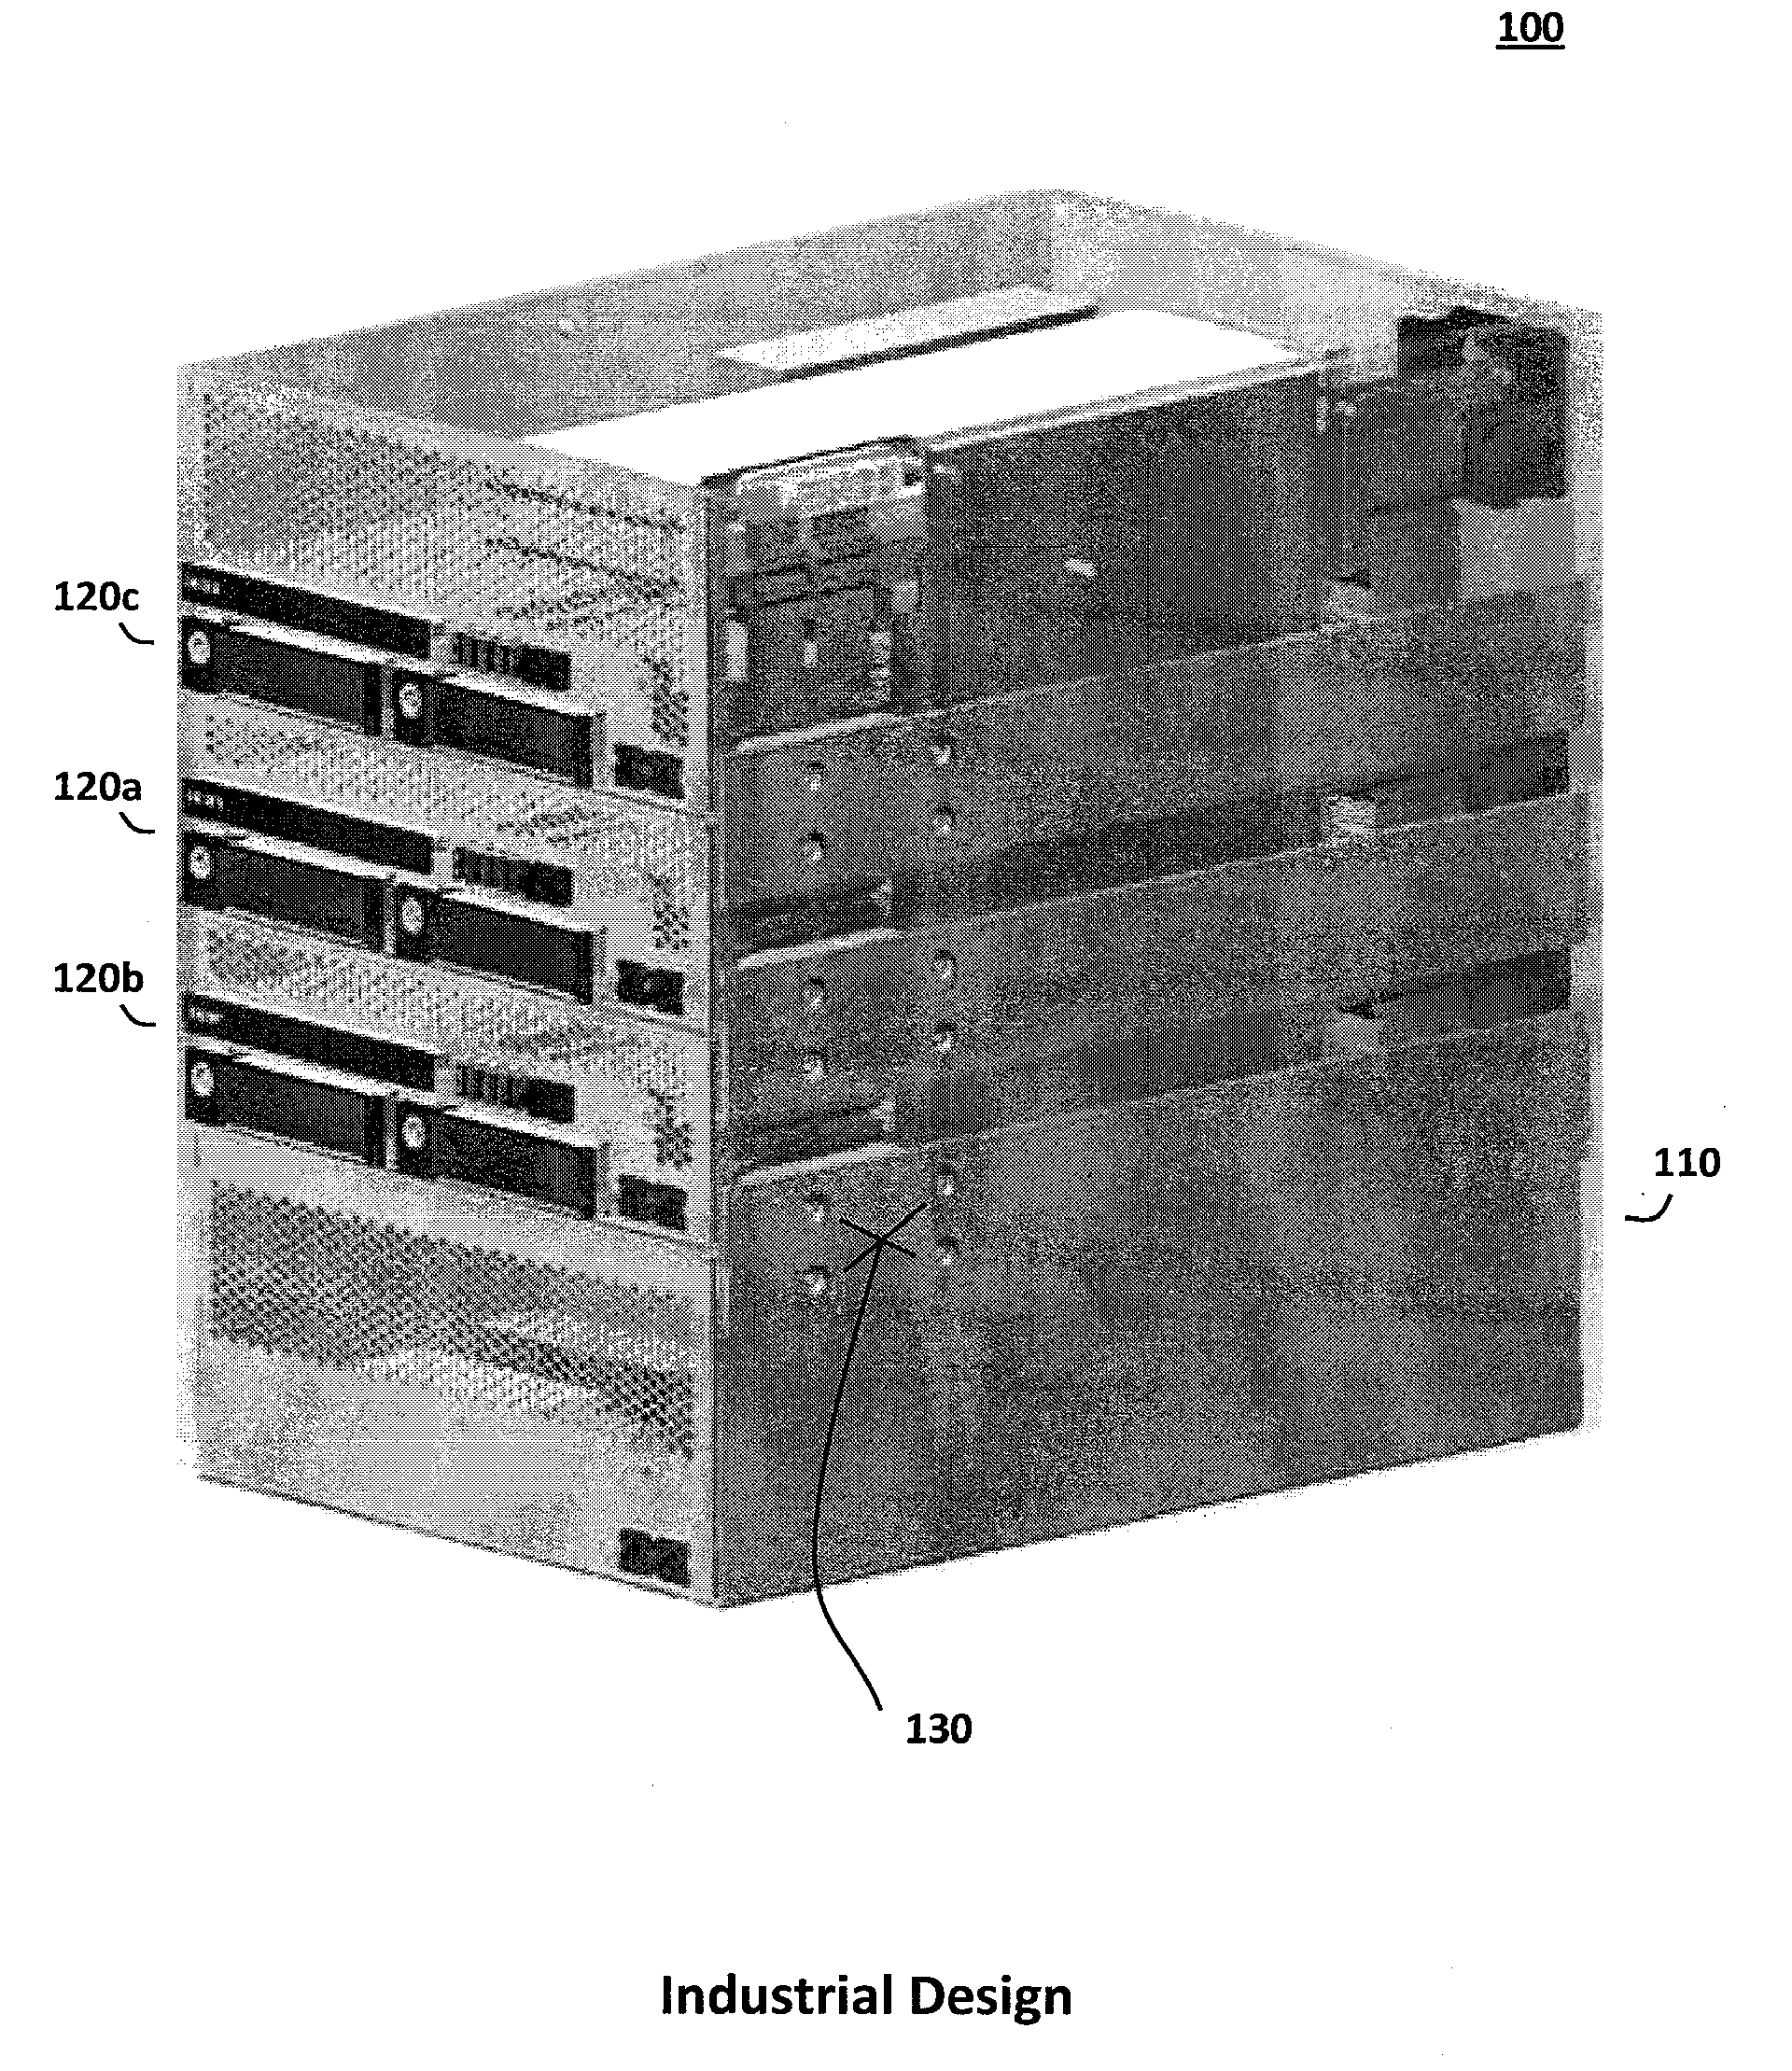 Adaptive computing system with modular control, switching, and power supply architecture